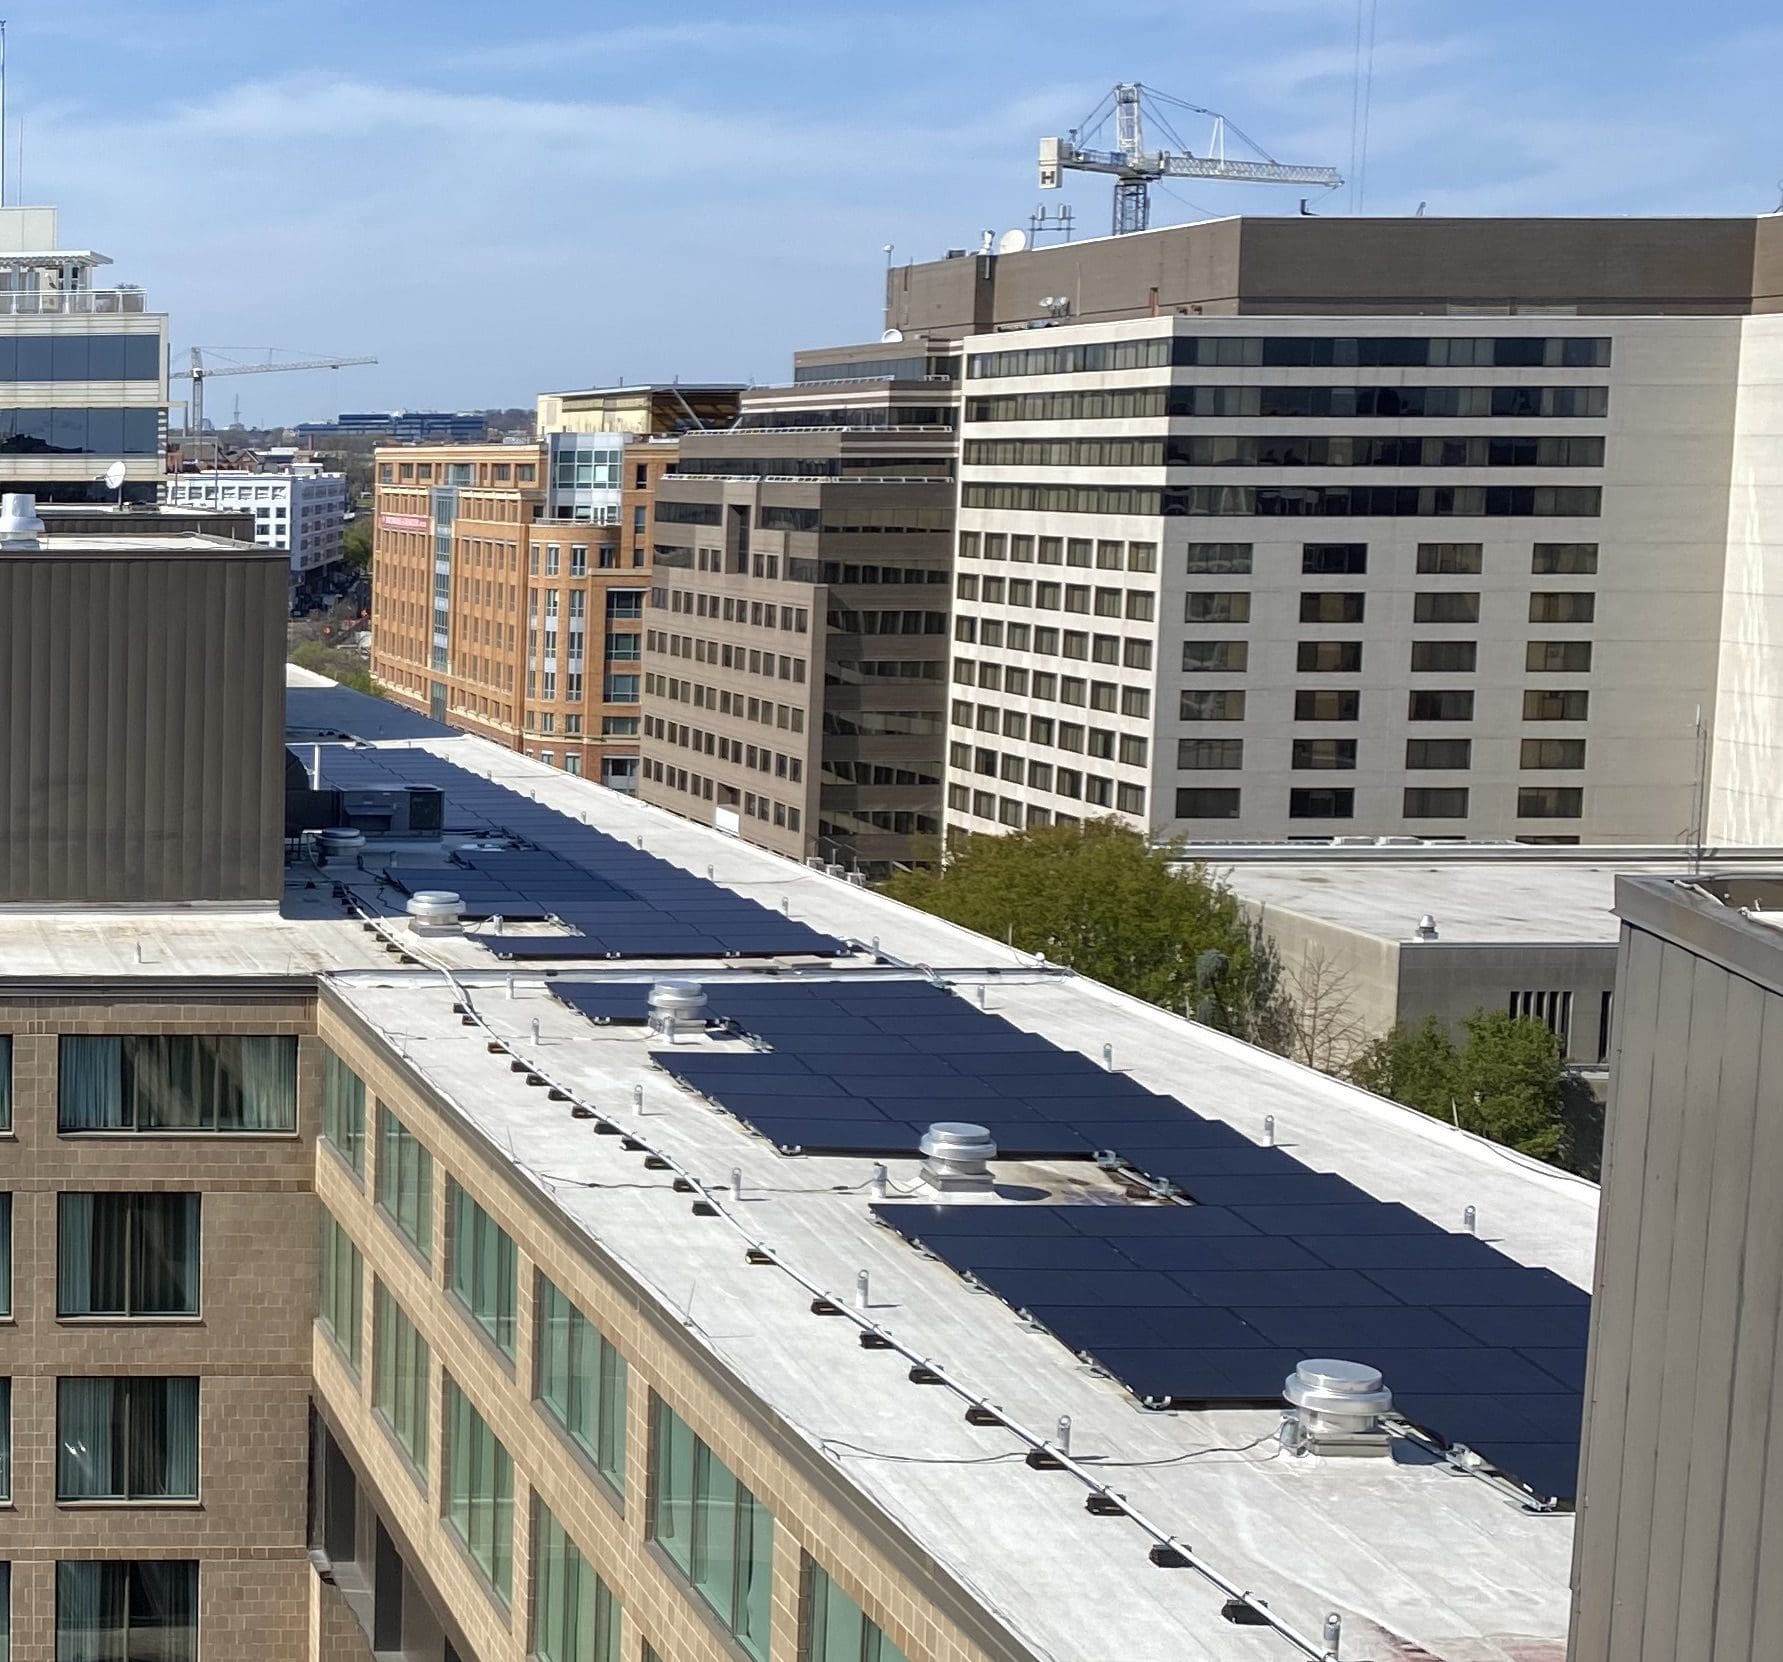 Hotel near Capitol Hill with rooftop solar installed by Aurora Energy